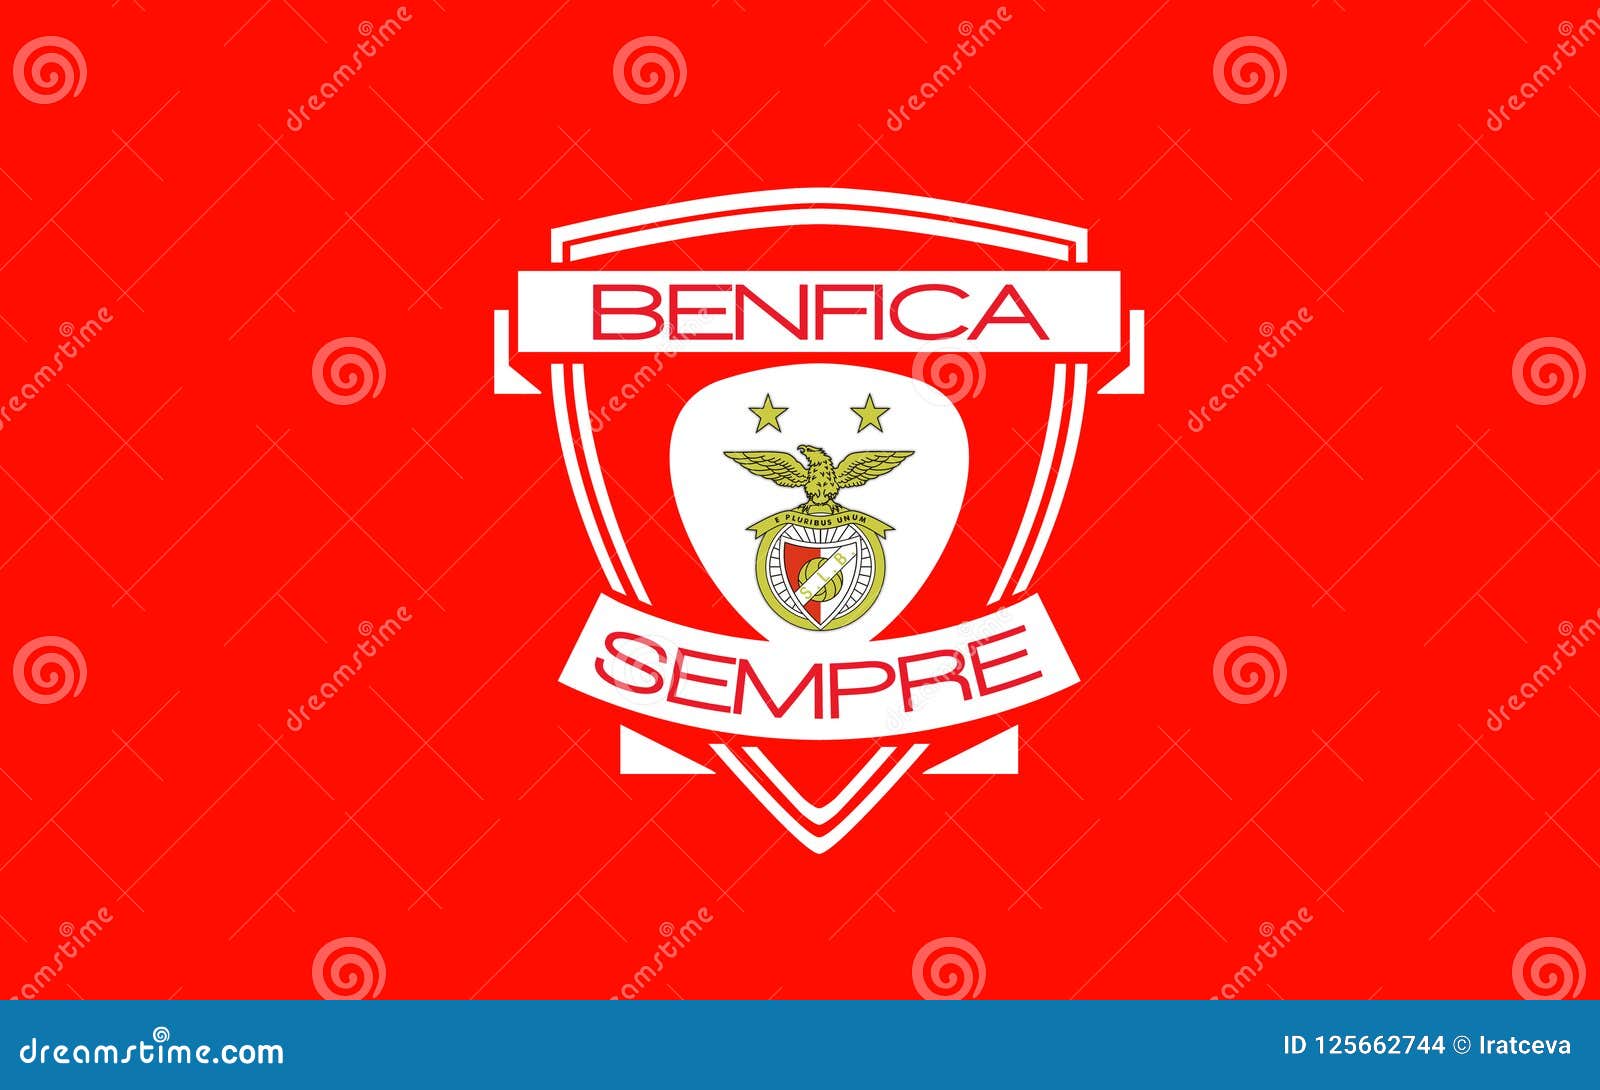 Flag Football Club Benfica, Portugal Editorial Stock Image - Image of